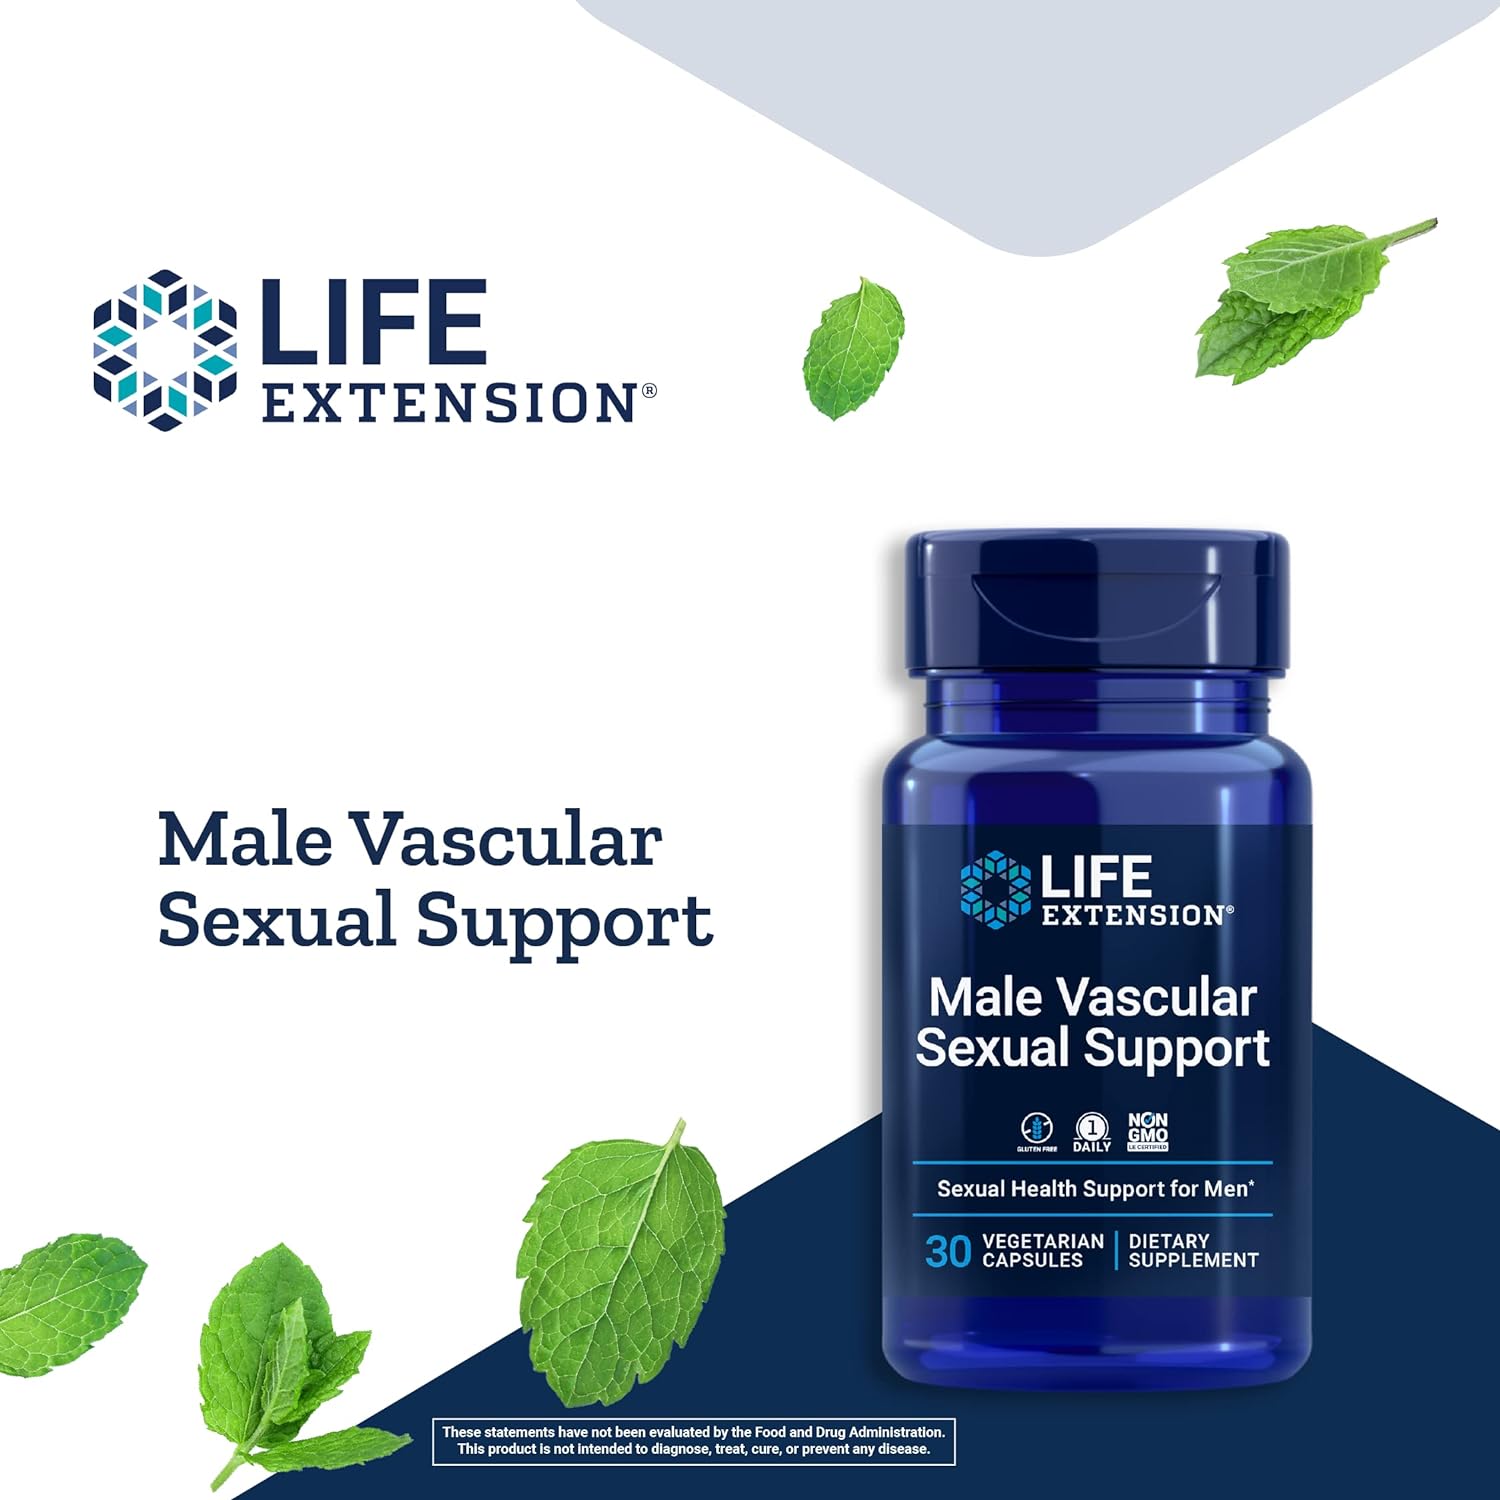 Life Extension Male Vascular Sexual Support Capsules with leaves falling around it